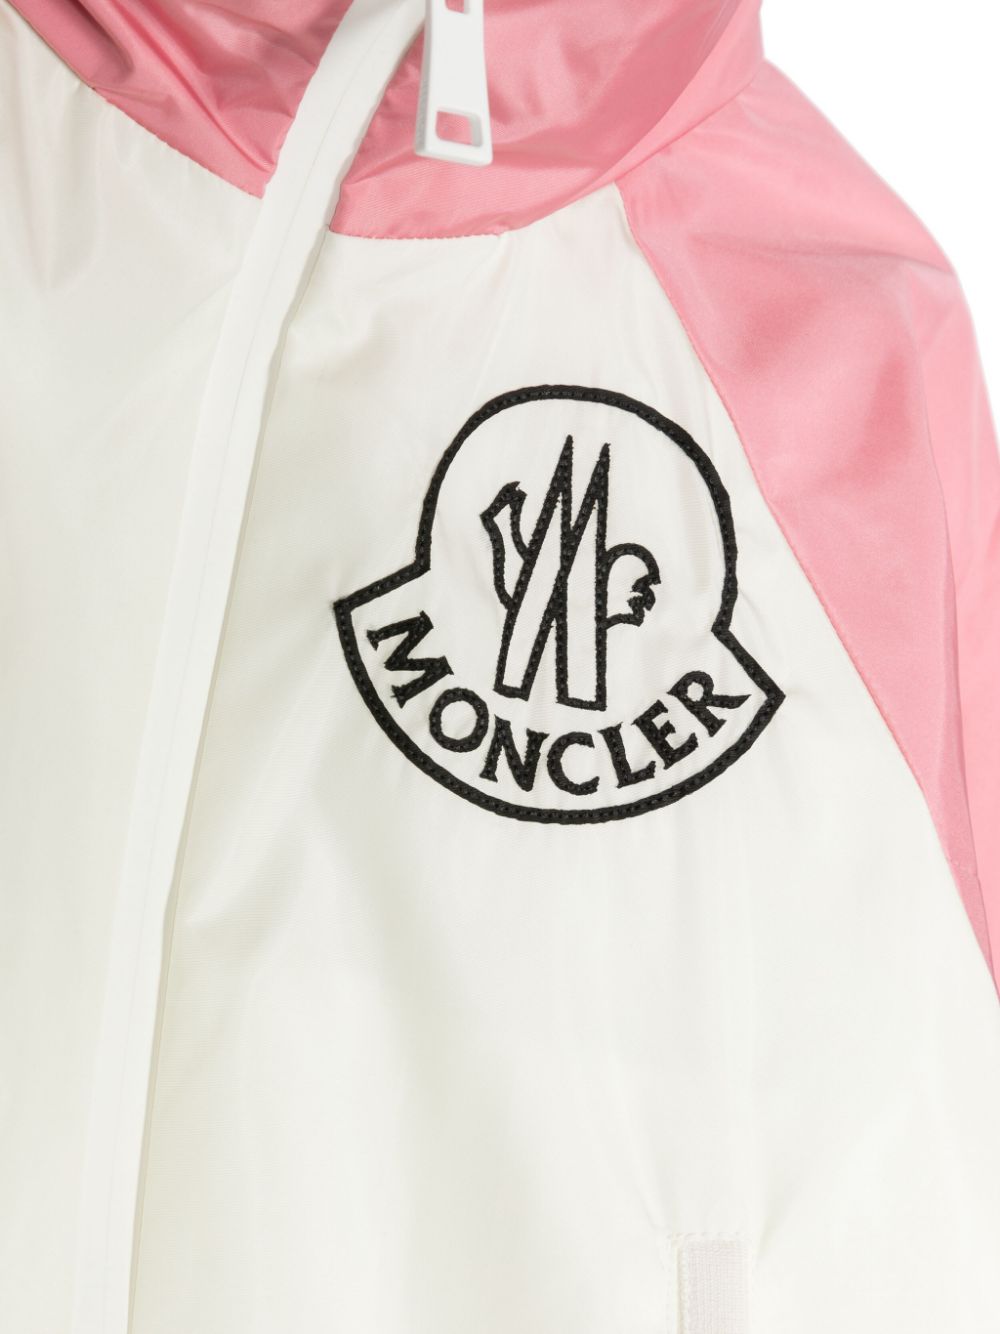 Pink/white colour-block zip-up bomber